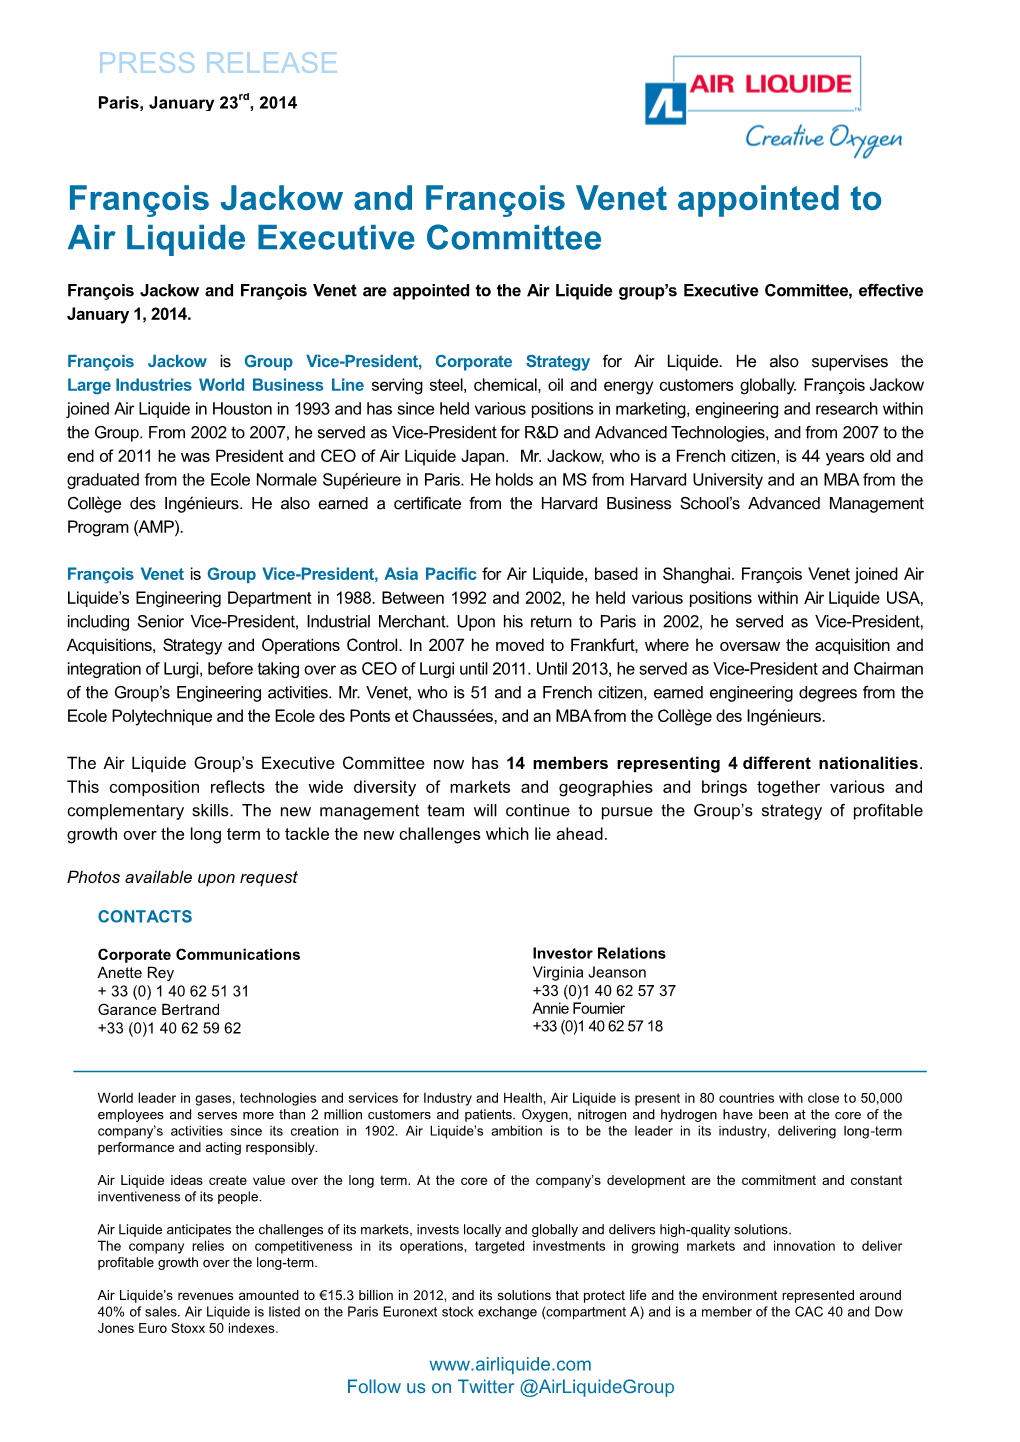 François Jackow and François Venet Appointed to Air Liquide Executive Committee